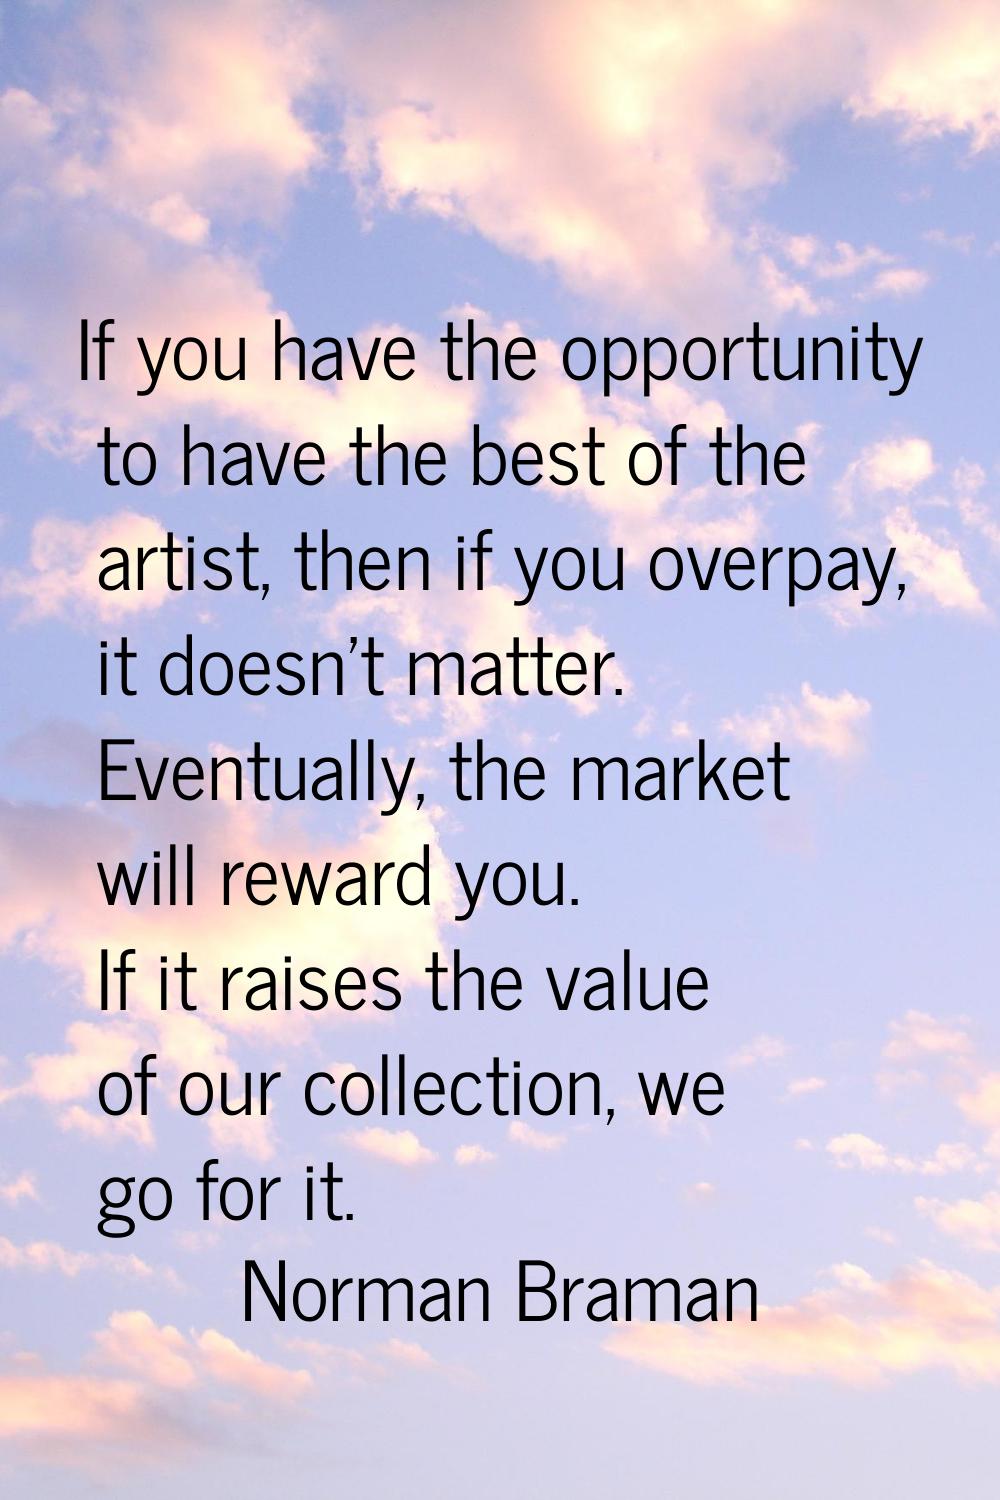 If you have the opportunity to have the best of the artist, then if you overpay, it doesn't matter.